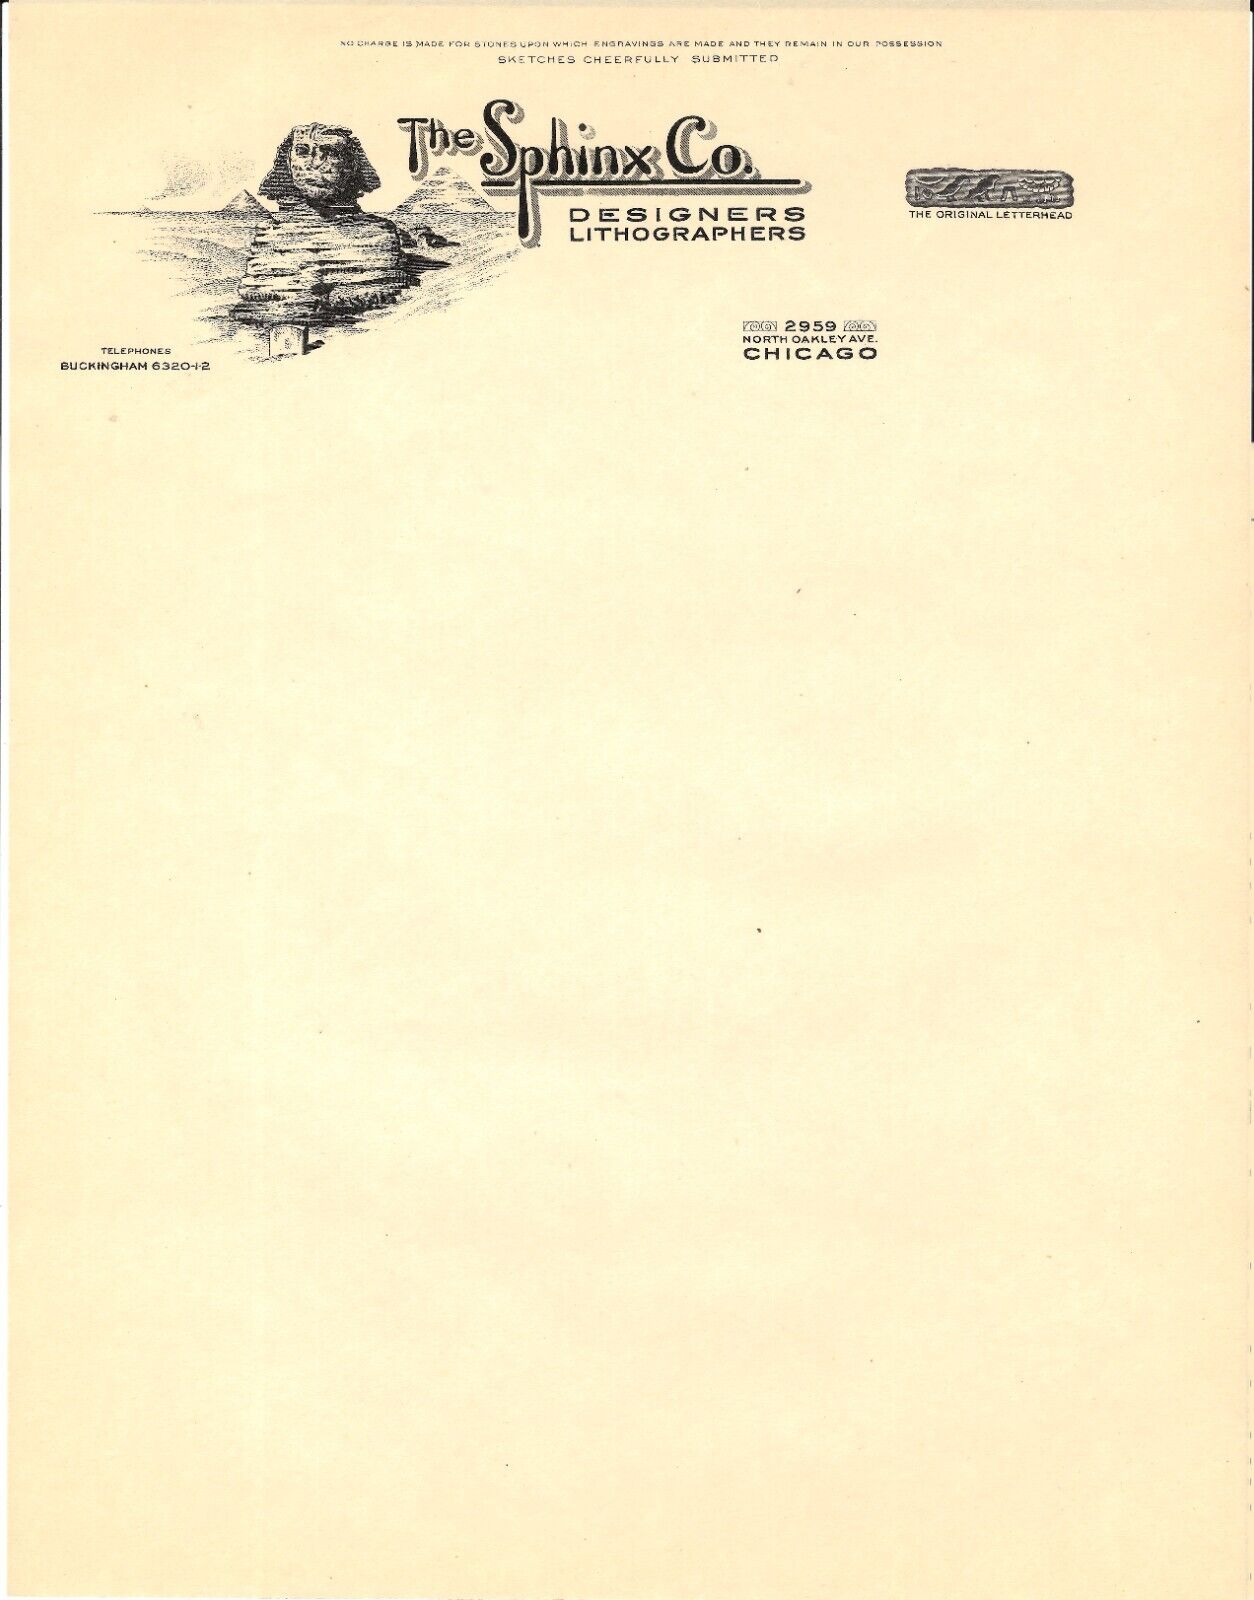 The Sphinx Co. Designers Lithographers Letter Head Blank Chicago Illustrated :D